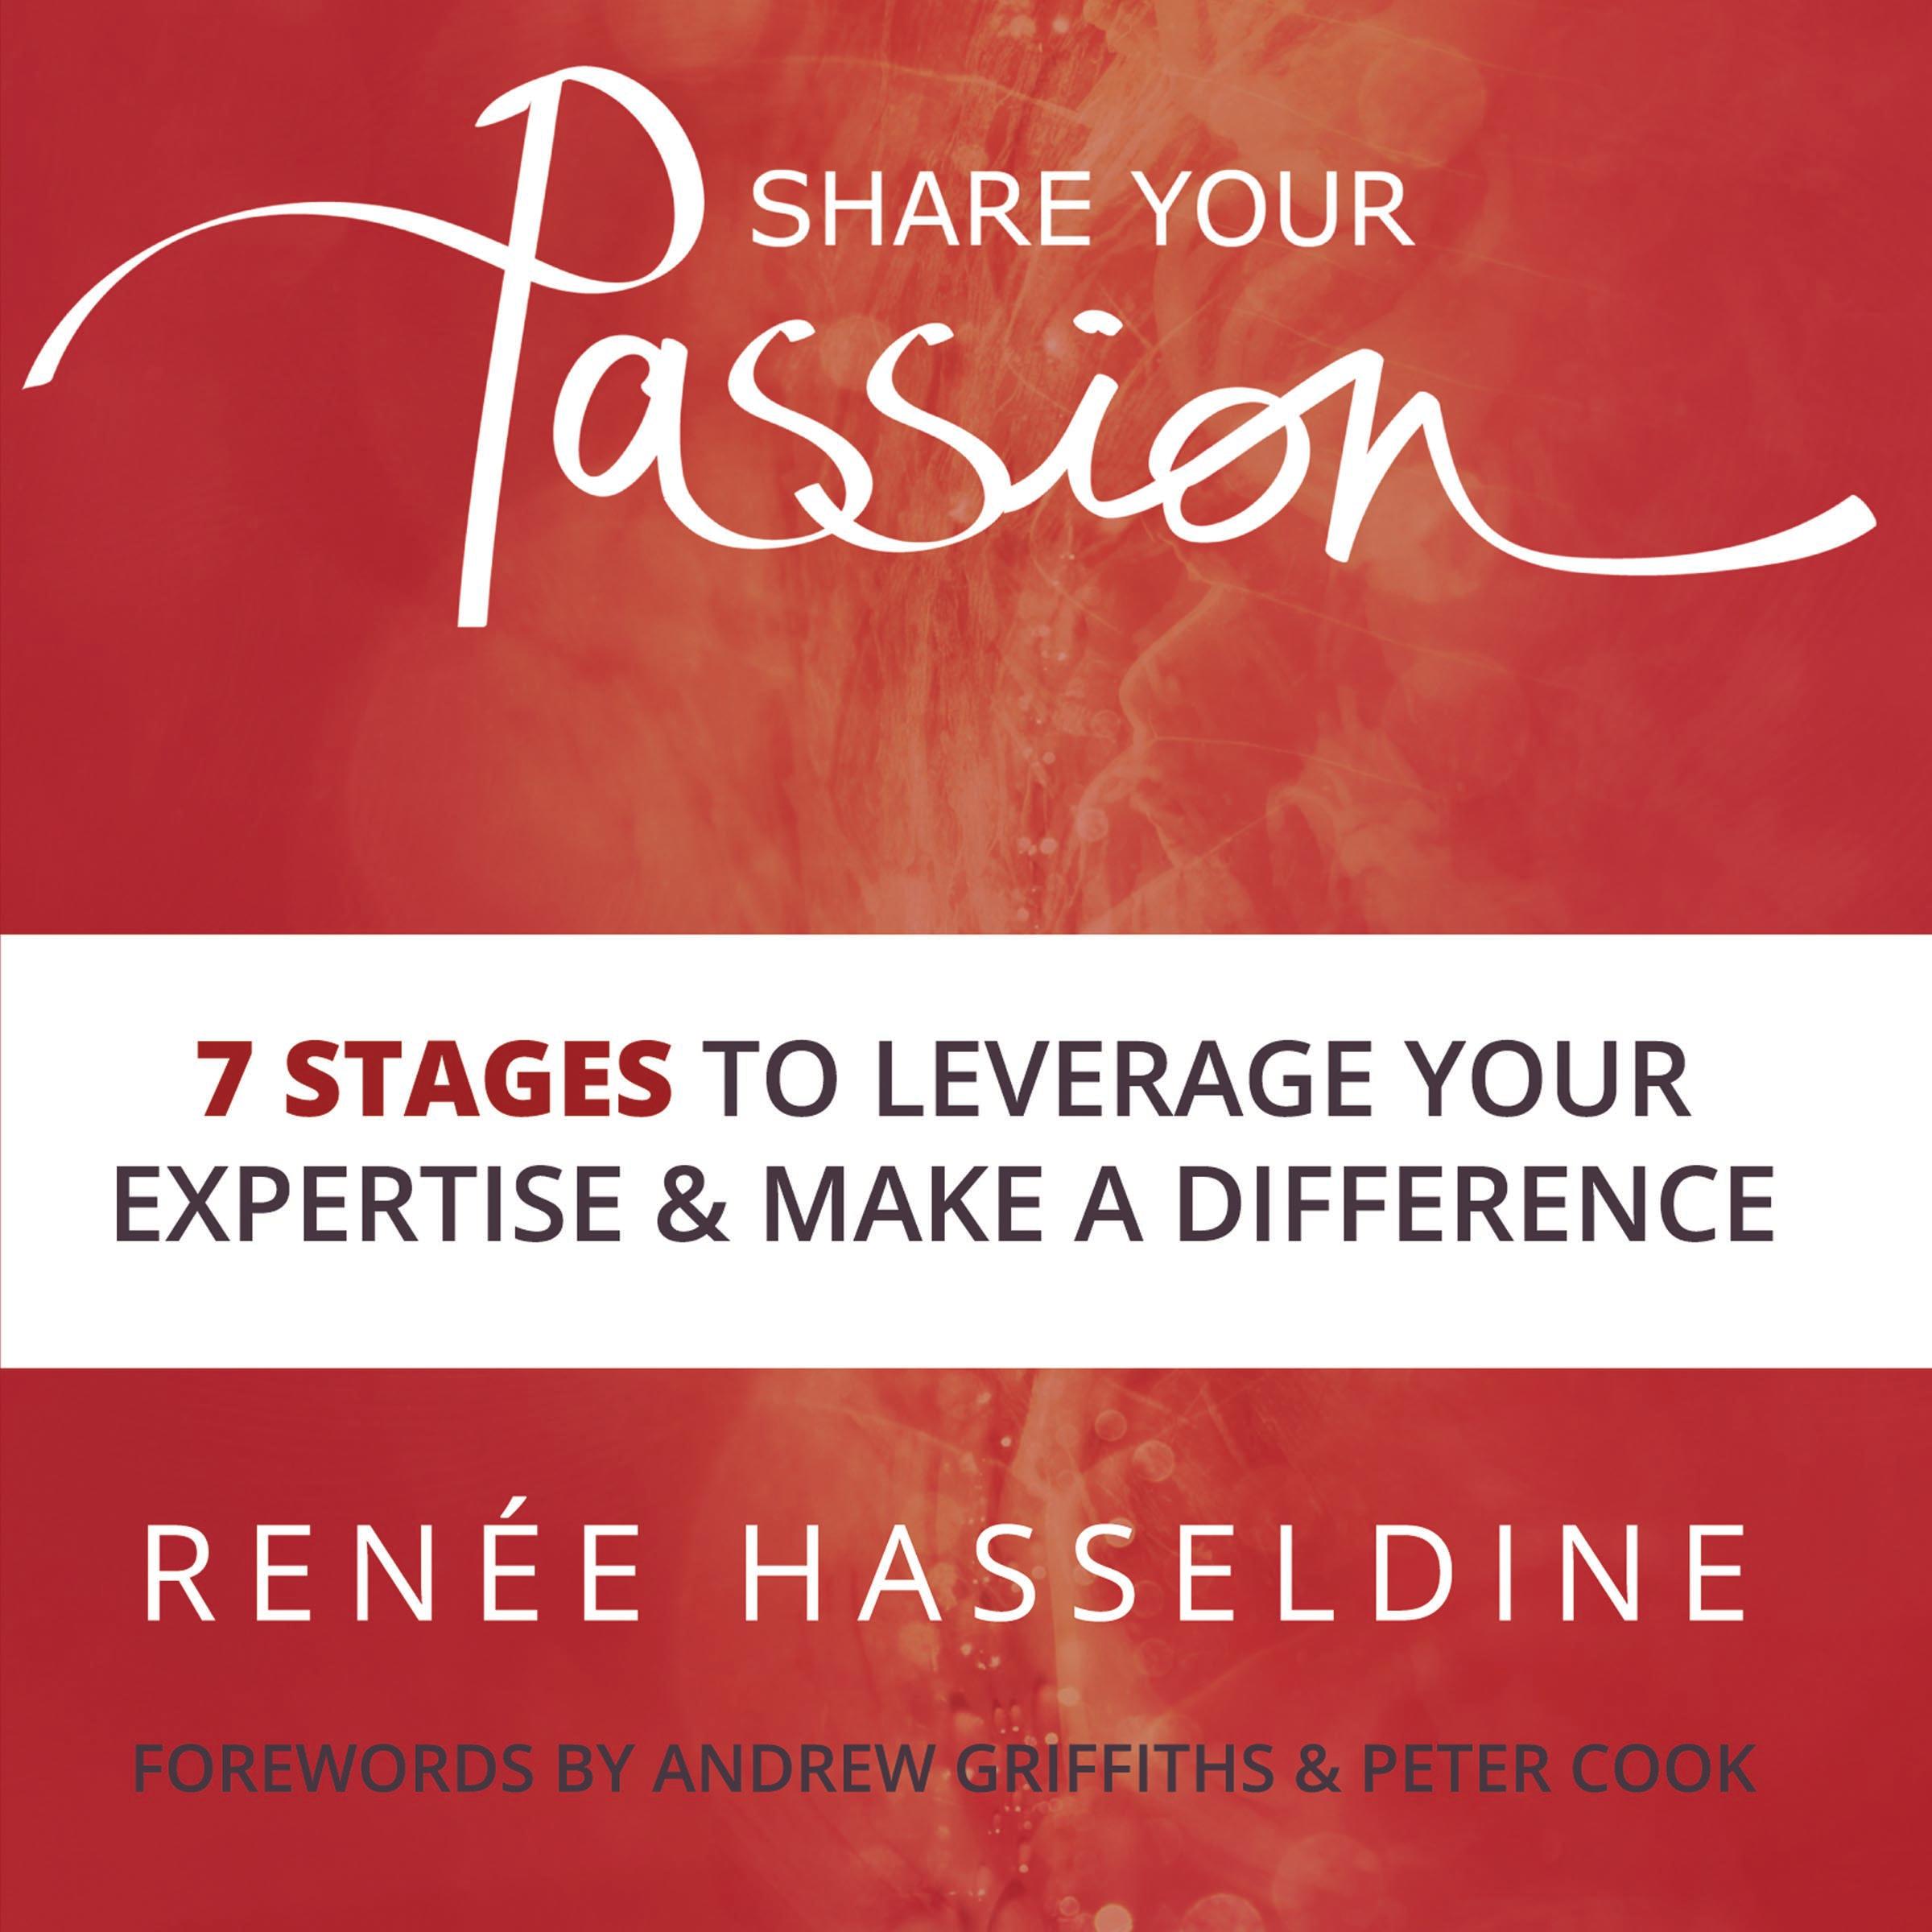 Share Your Passion: 7 Stages To Leverage Your Expertise And Make A Difference